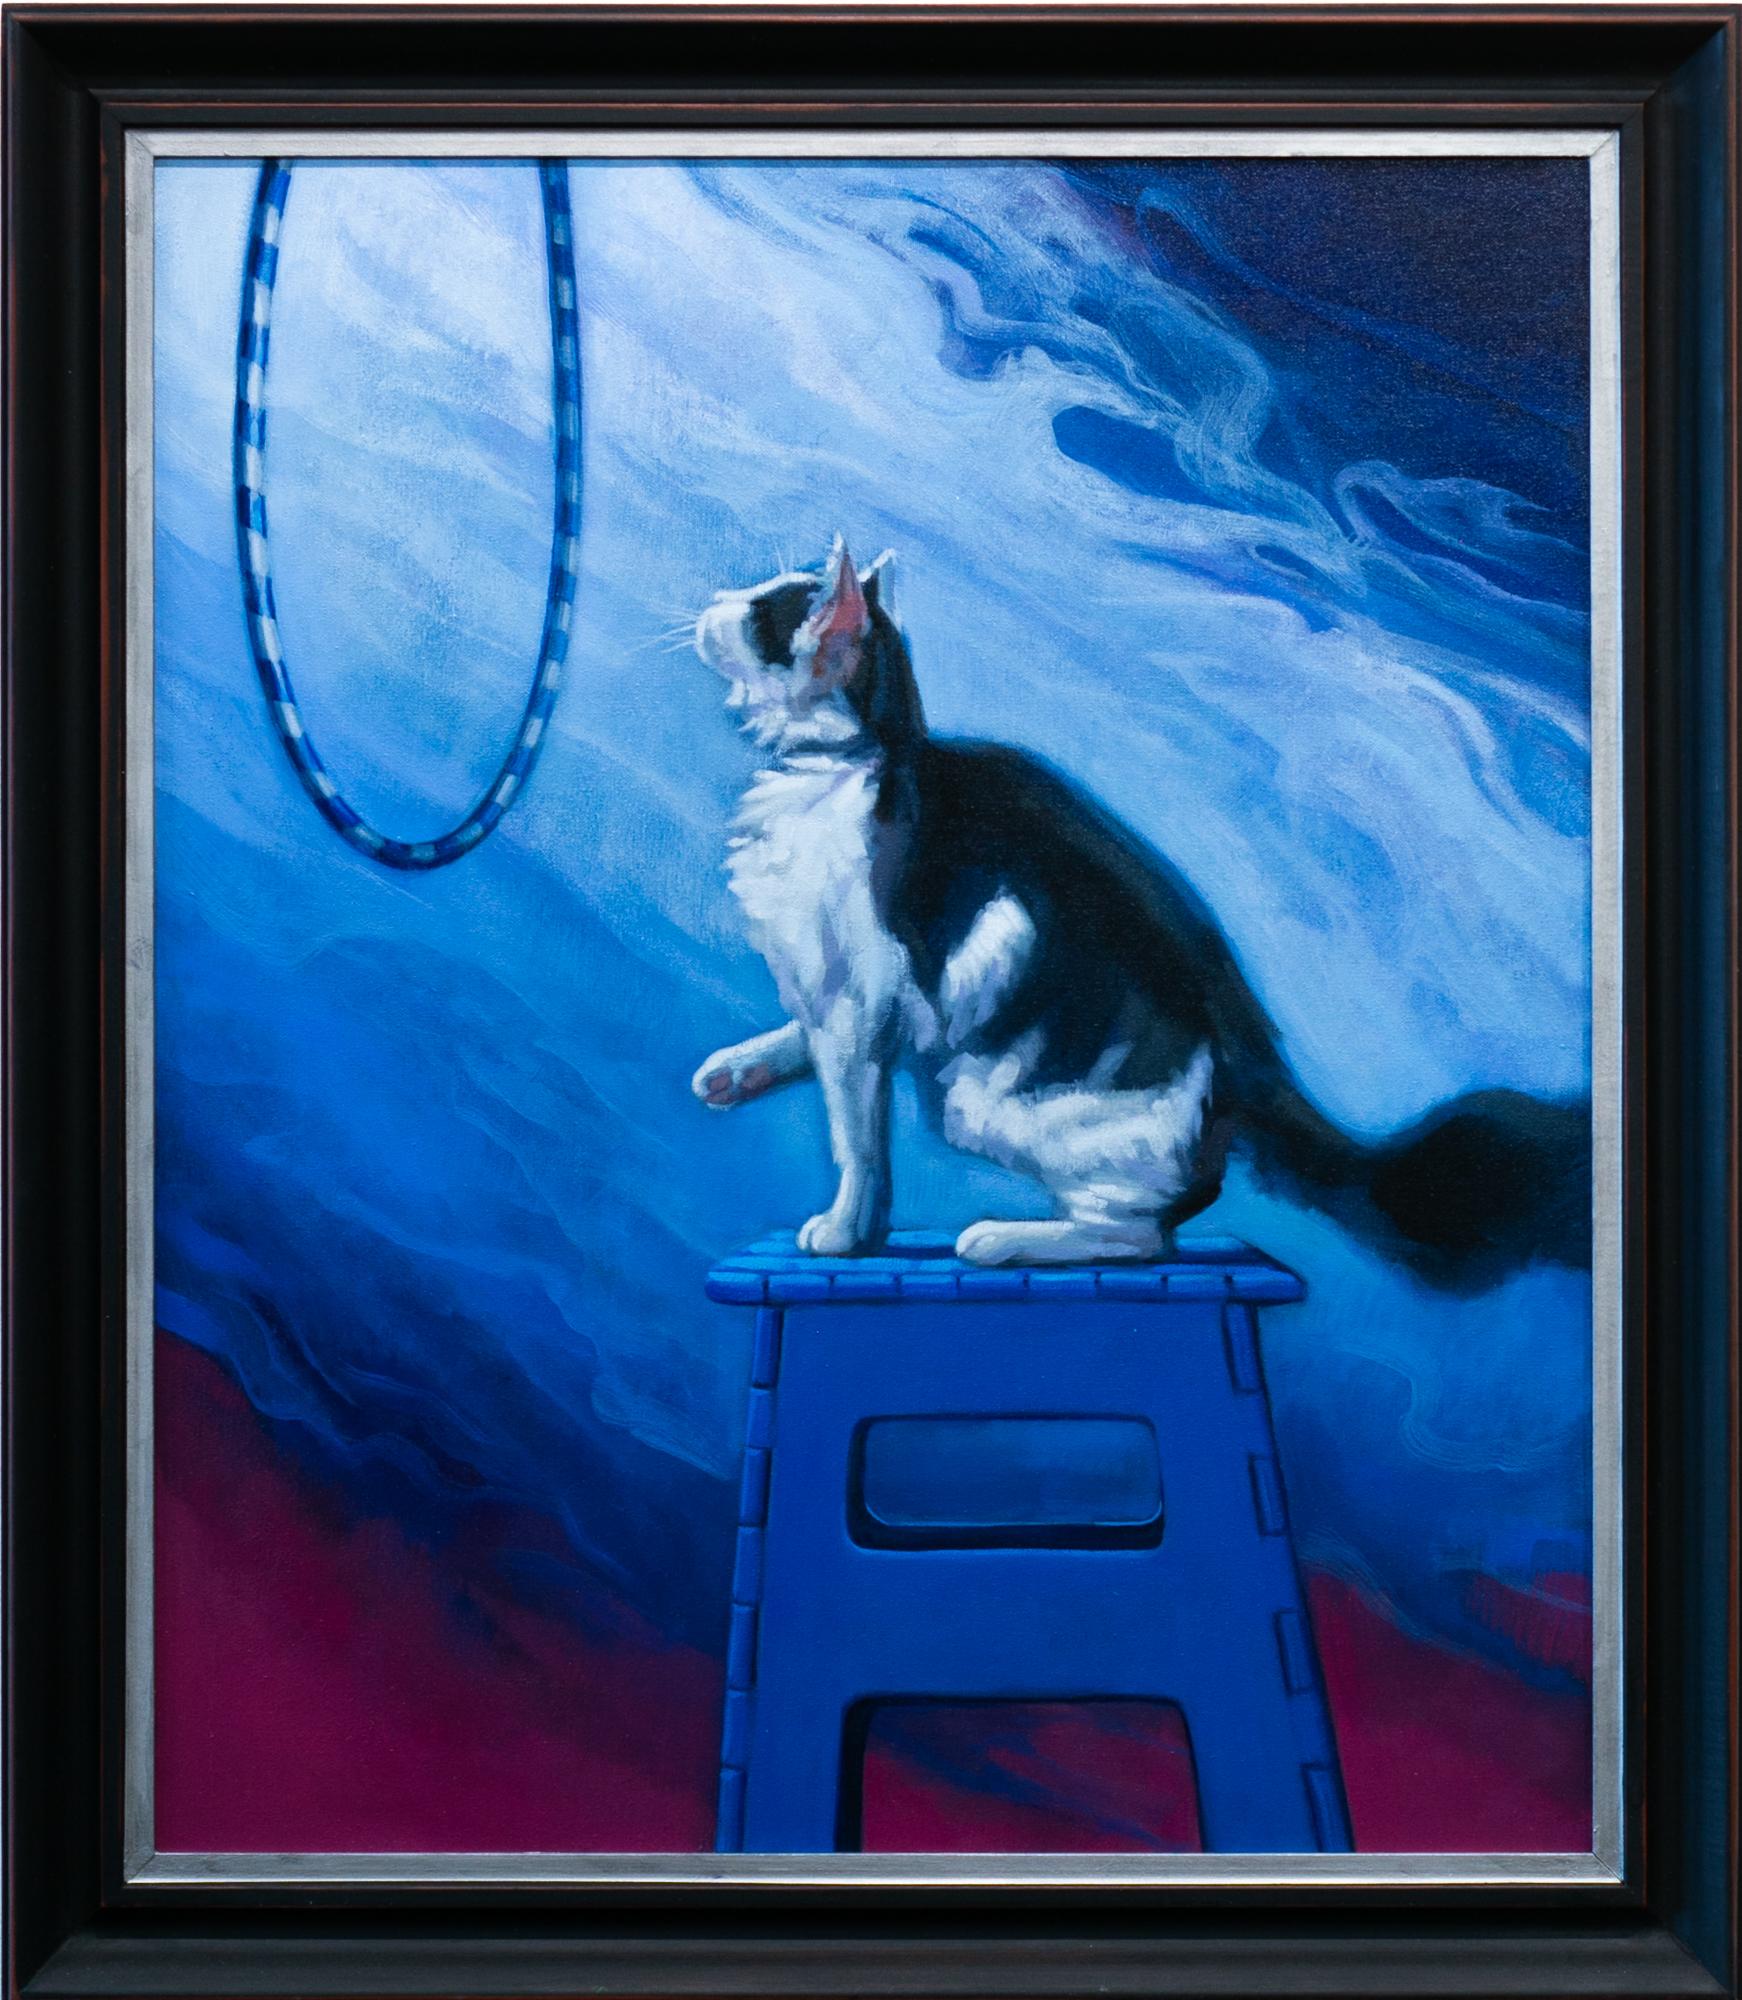 Katherine Fraser Animal Painting - "The Benefits of an Open Mind", Blue, Purple, White, Oil Painting of Cat